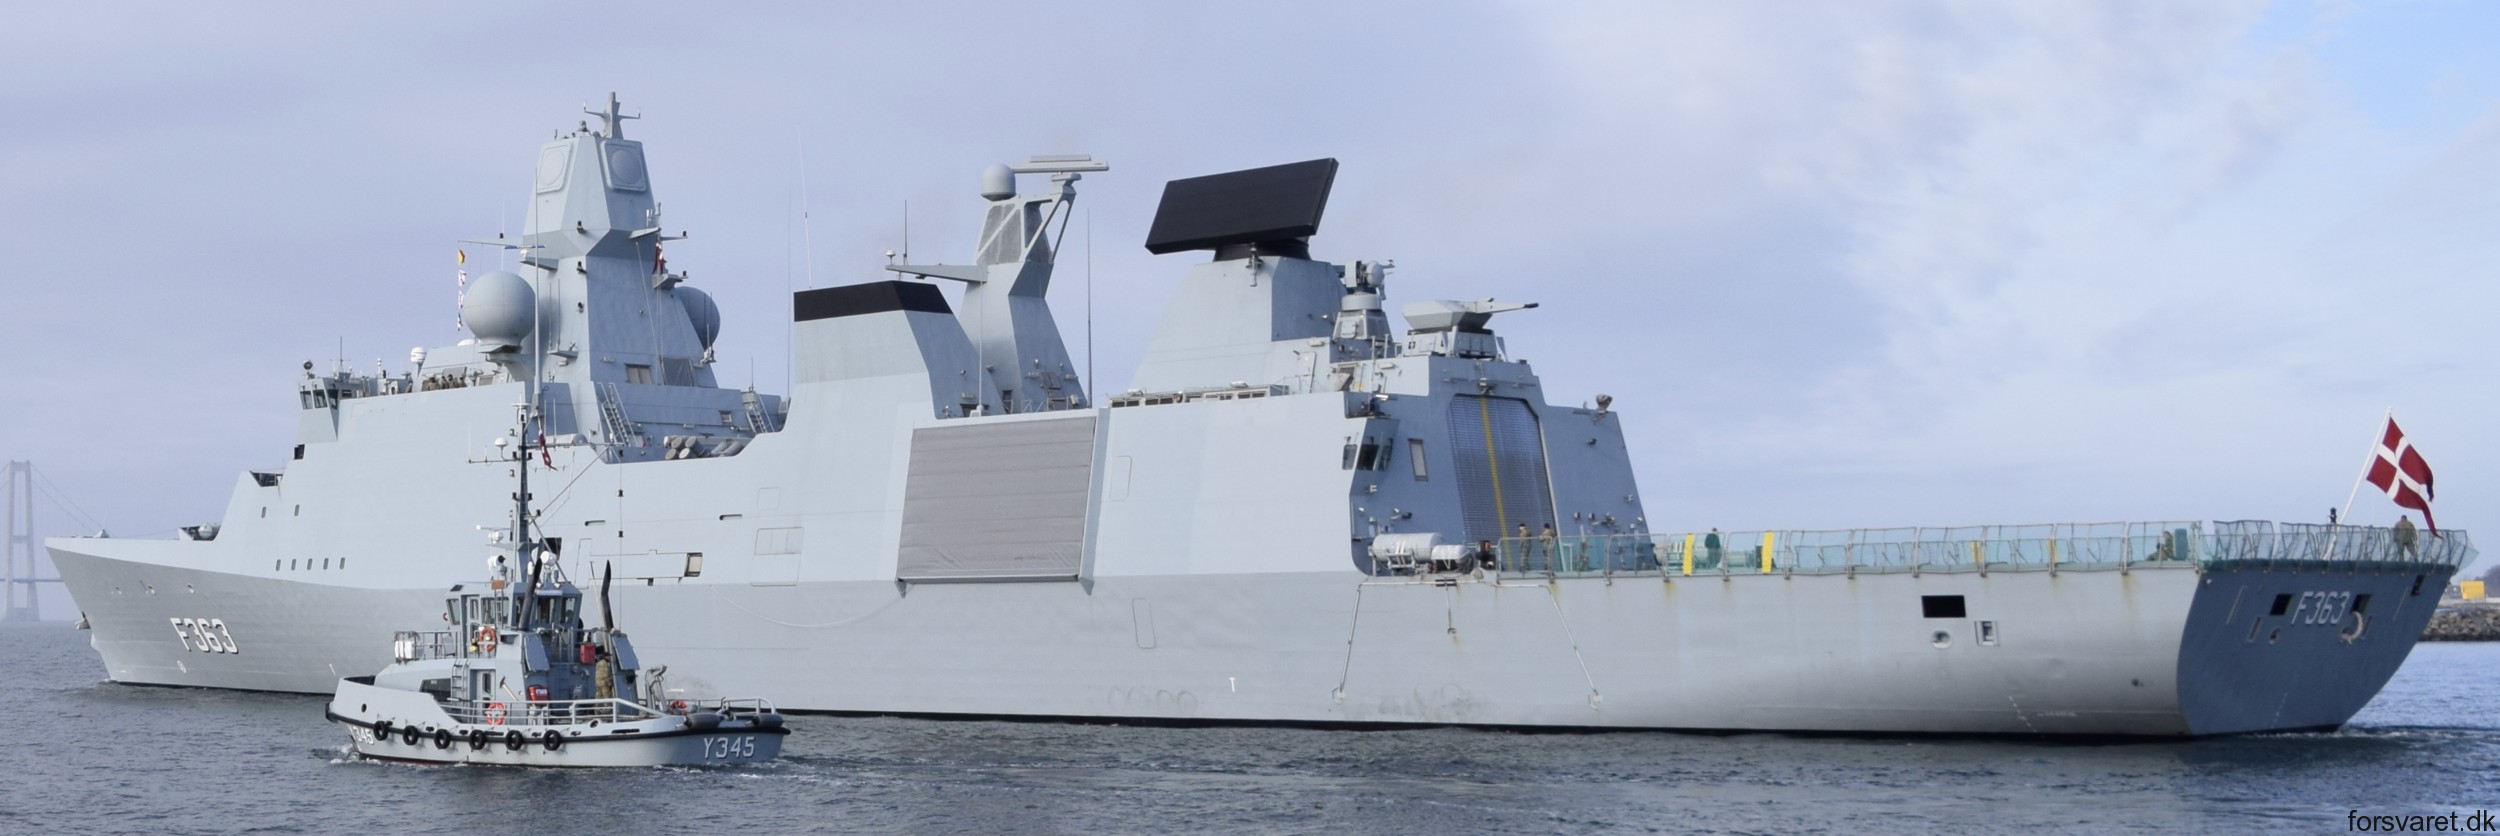 f-363 hdms niels juel iver huitfeldt class guided missile frigate ffg royal danish navy 30